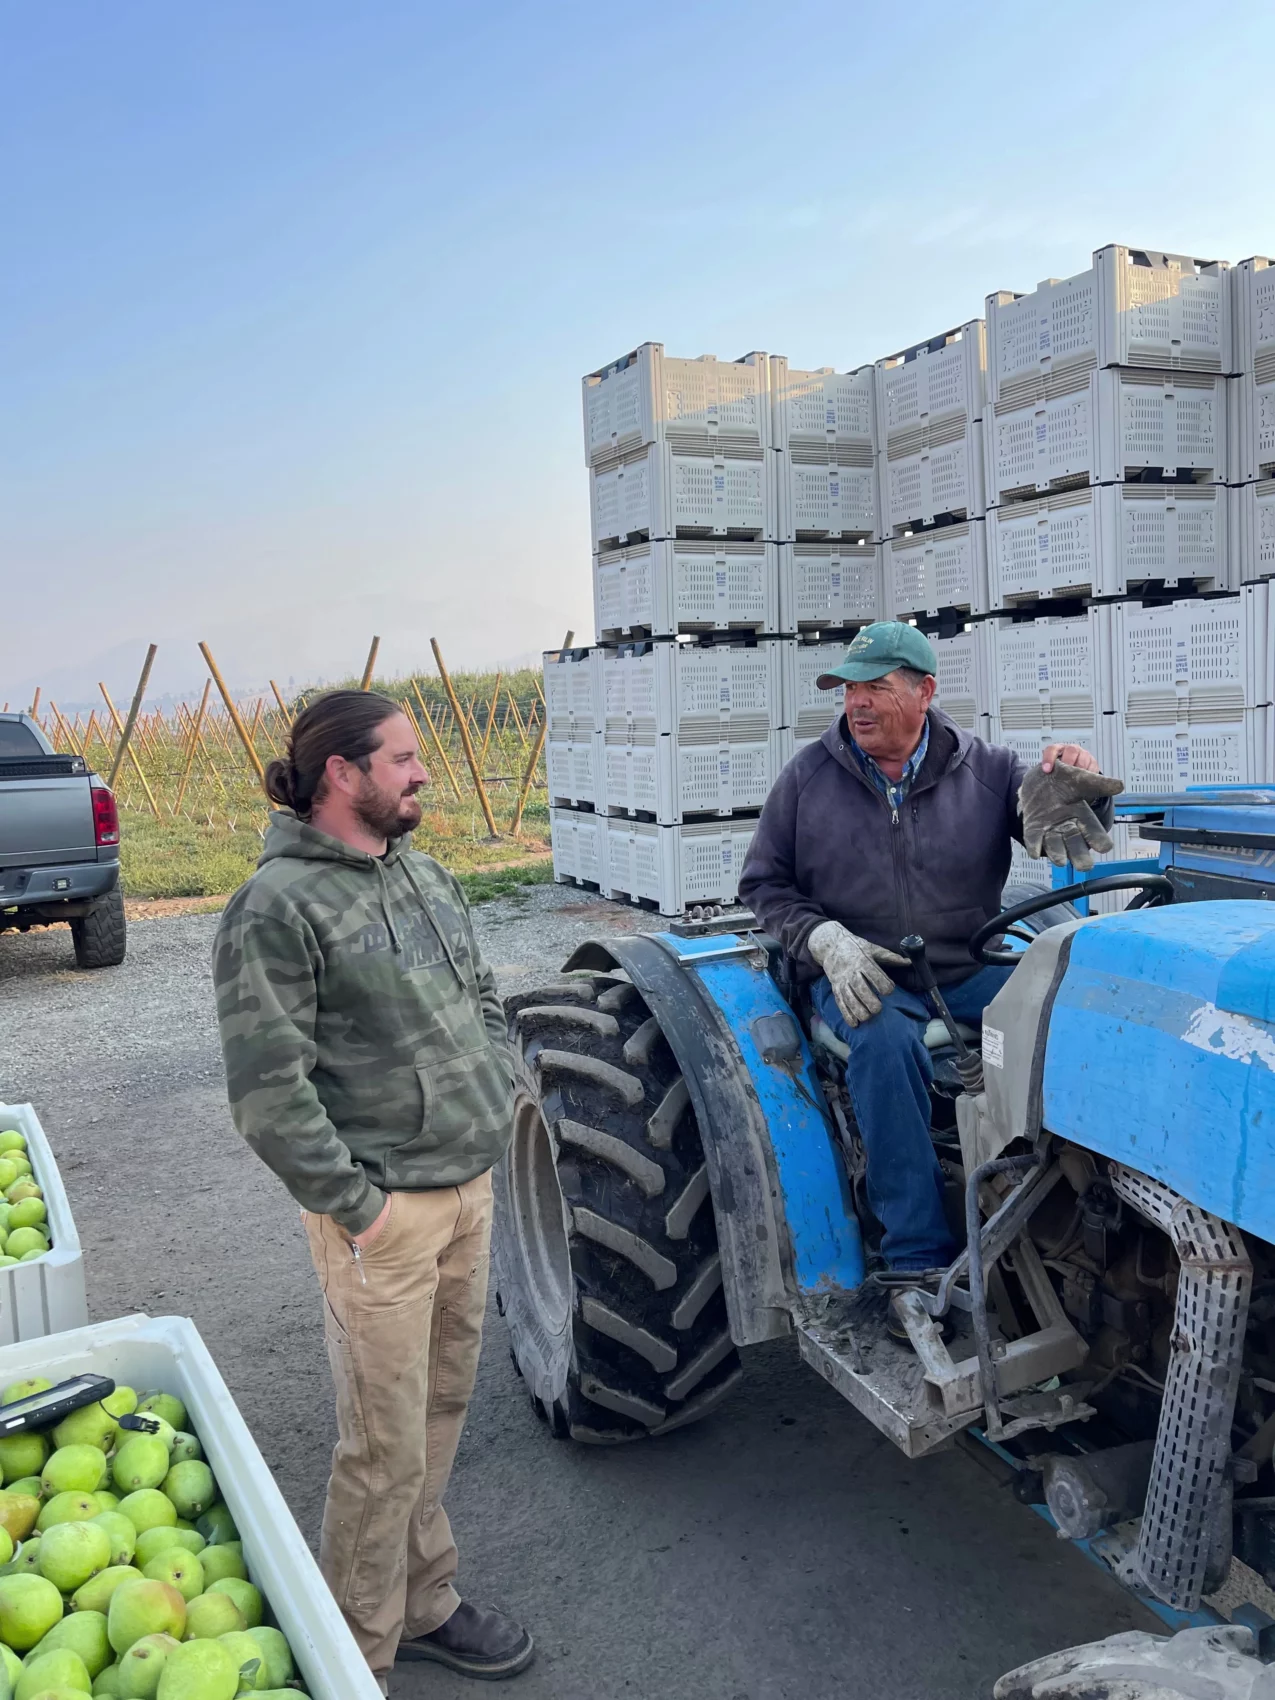 Man talks to guy on a blue tractor with bins of pears beside him.